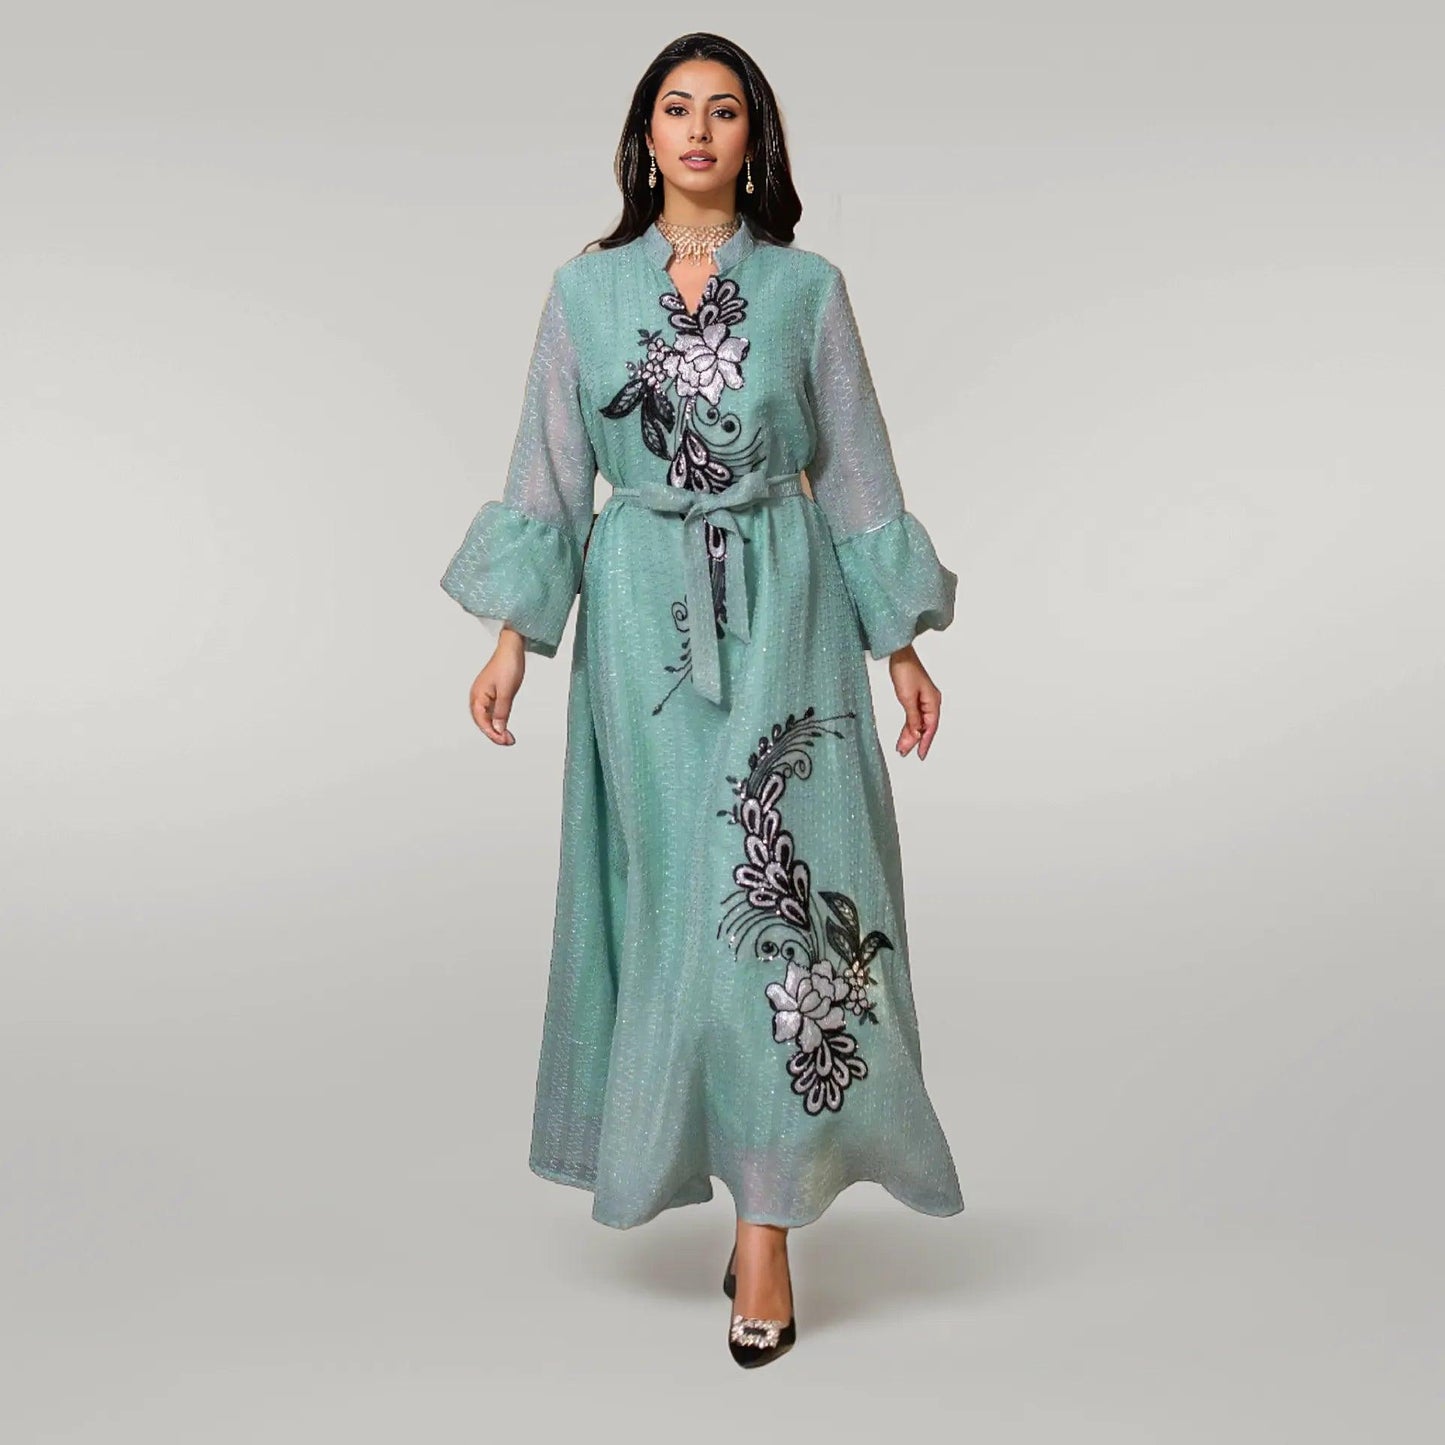 Casual/Party Wear Kaftan Dress with Floral Embroidery